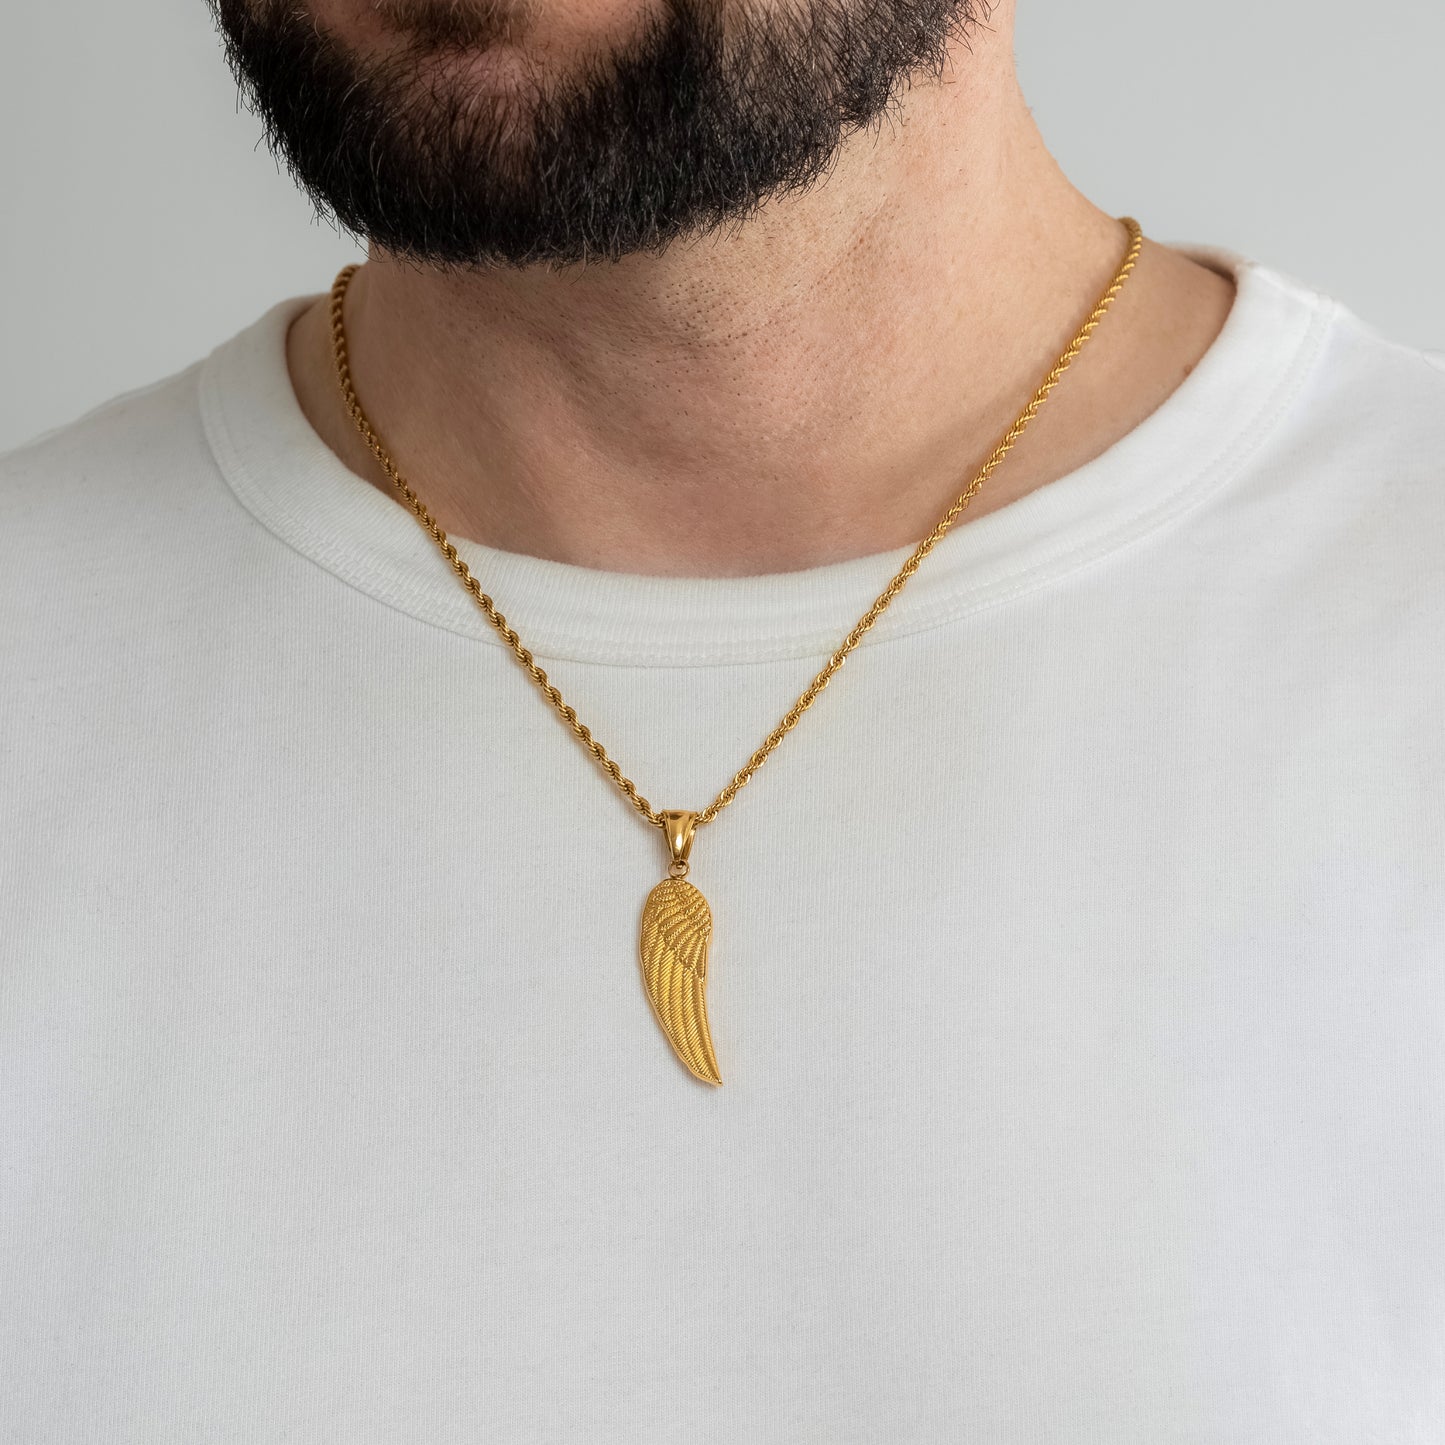 A male model in a white t-shirt wearing an Angel Wing Gold Pendant with a 3mm Gold Rope chain 22 inches. Close-up image of the non-tarnish, waterproof trending men's jewellery.